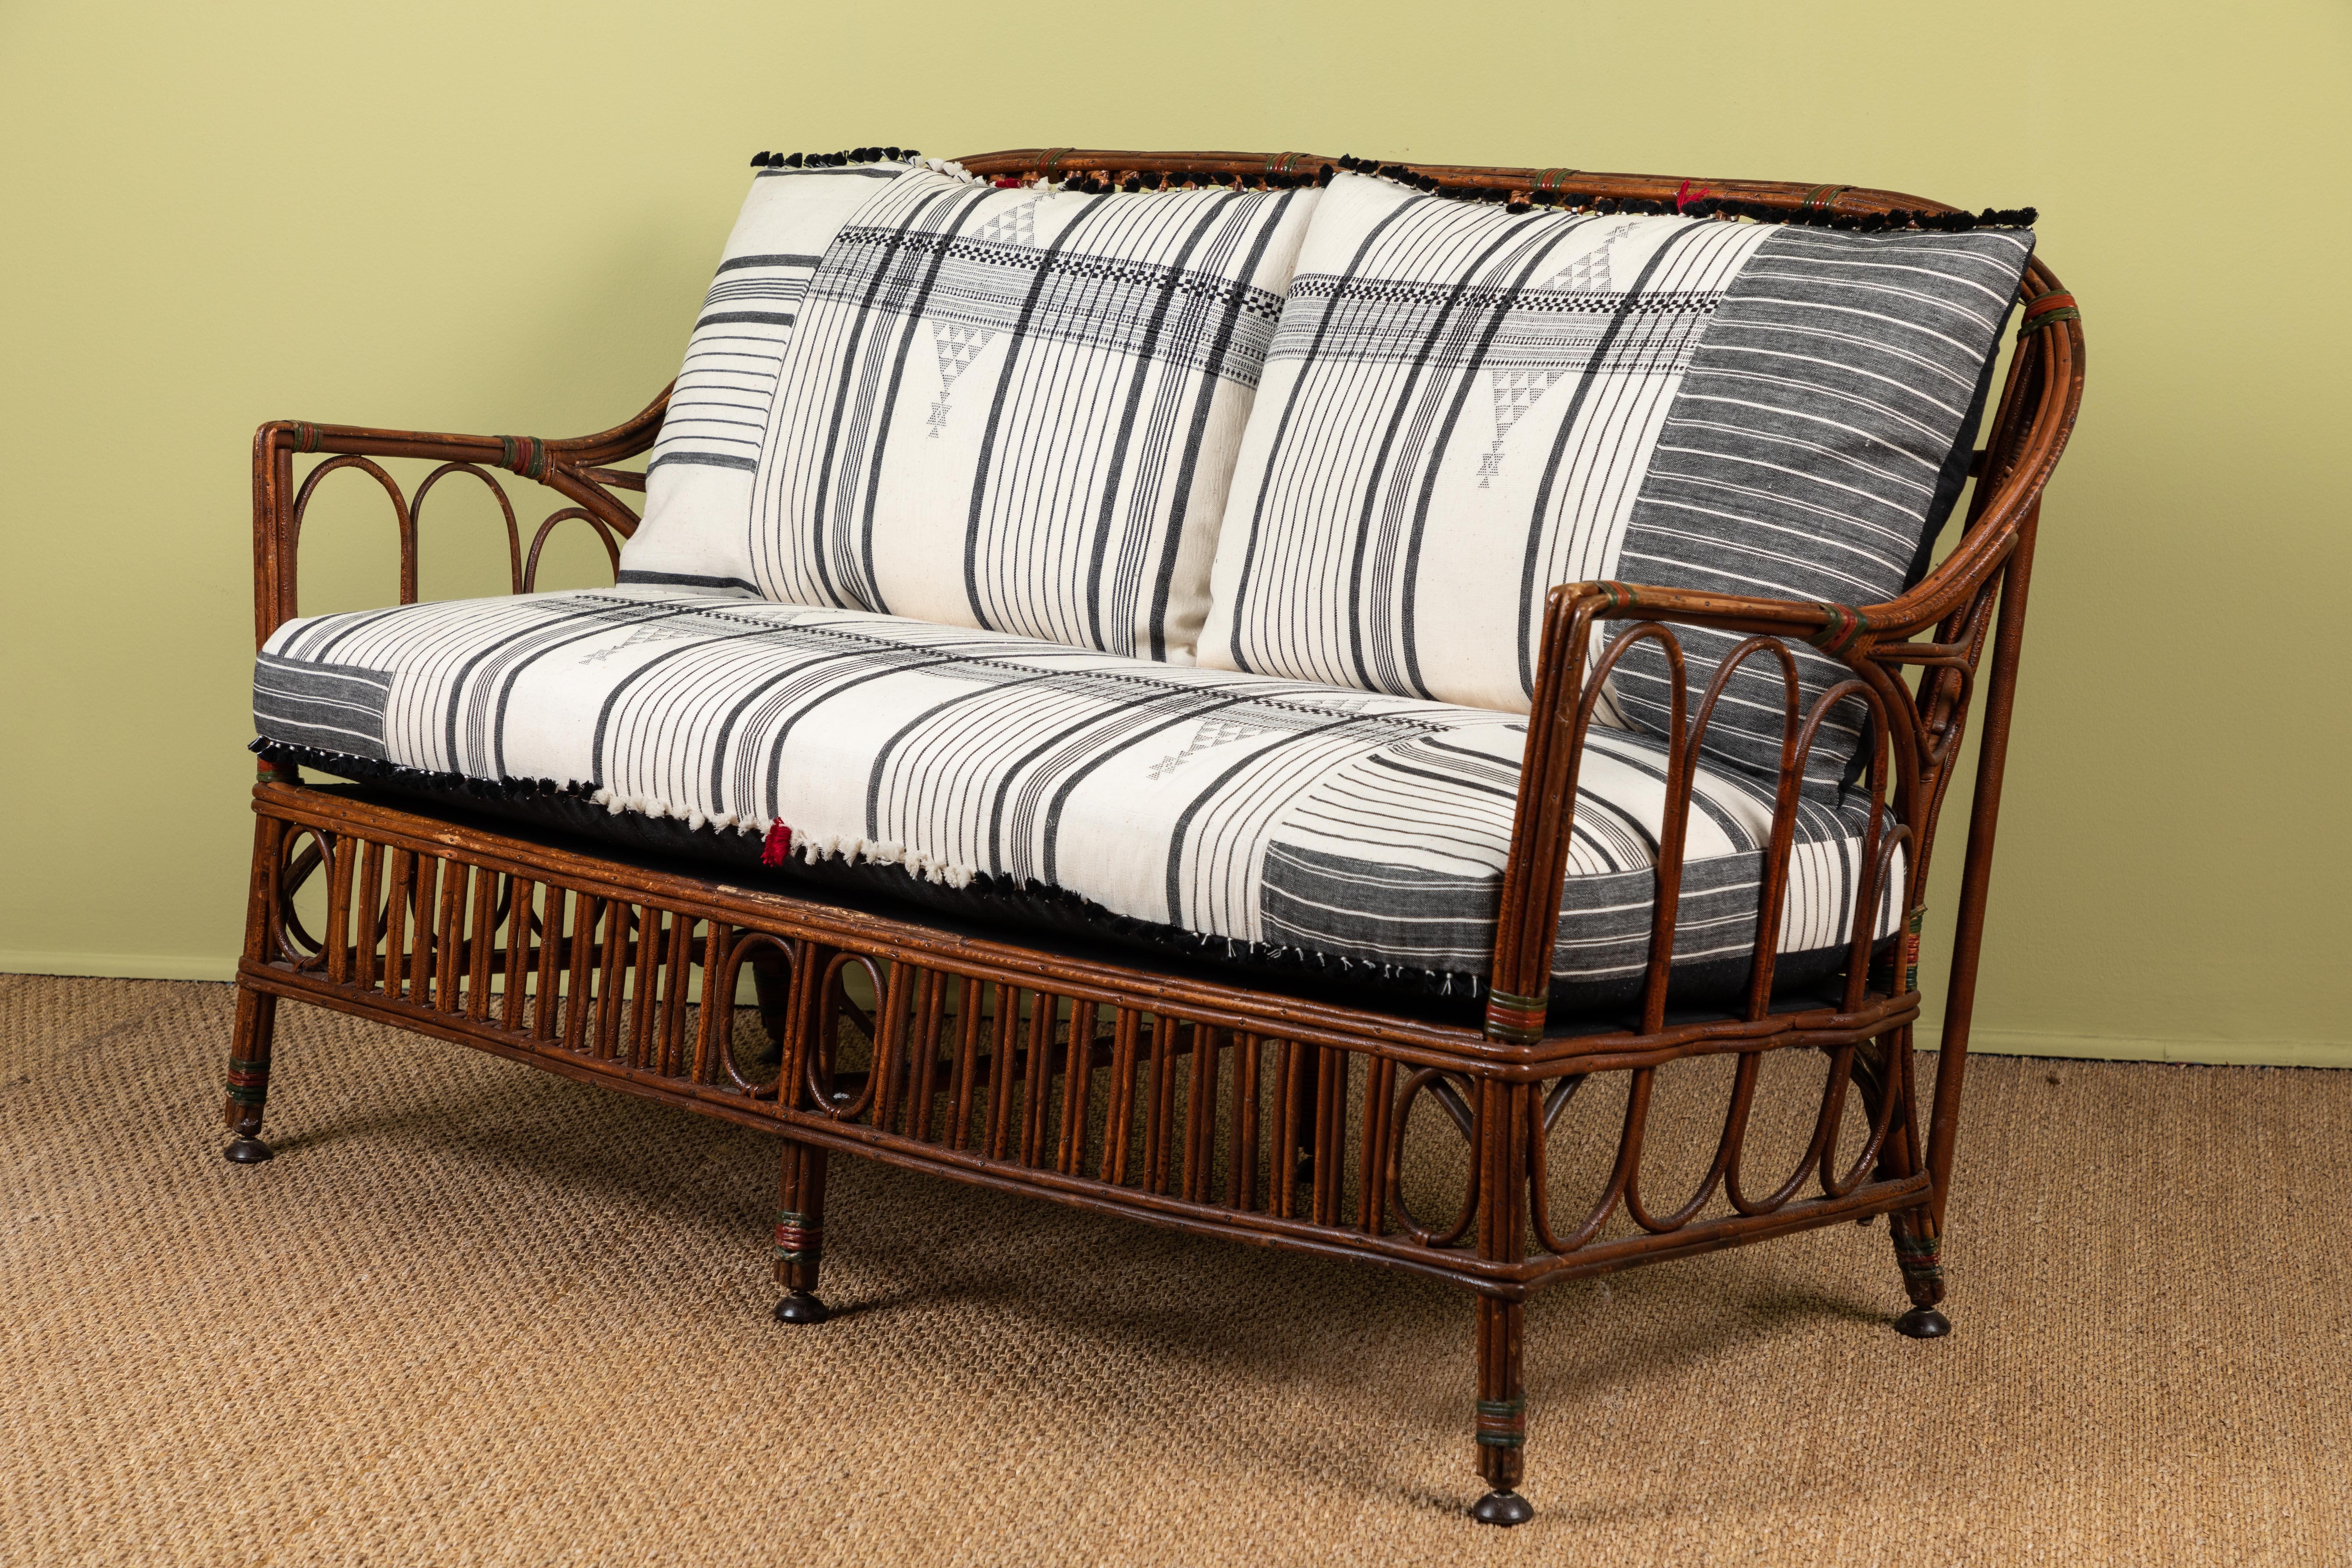 1920s Bent Wood Settee with Injiri Upholstery In Good Condition For Sale In Los Angeles, CA